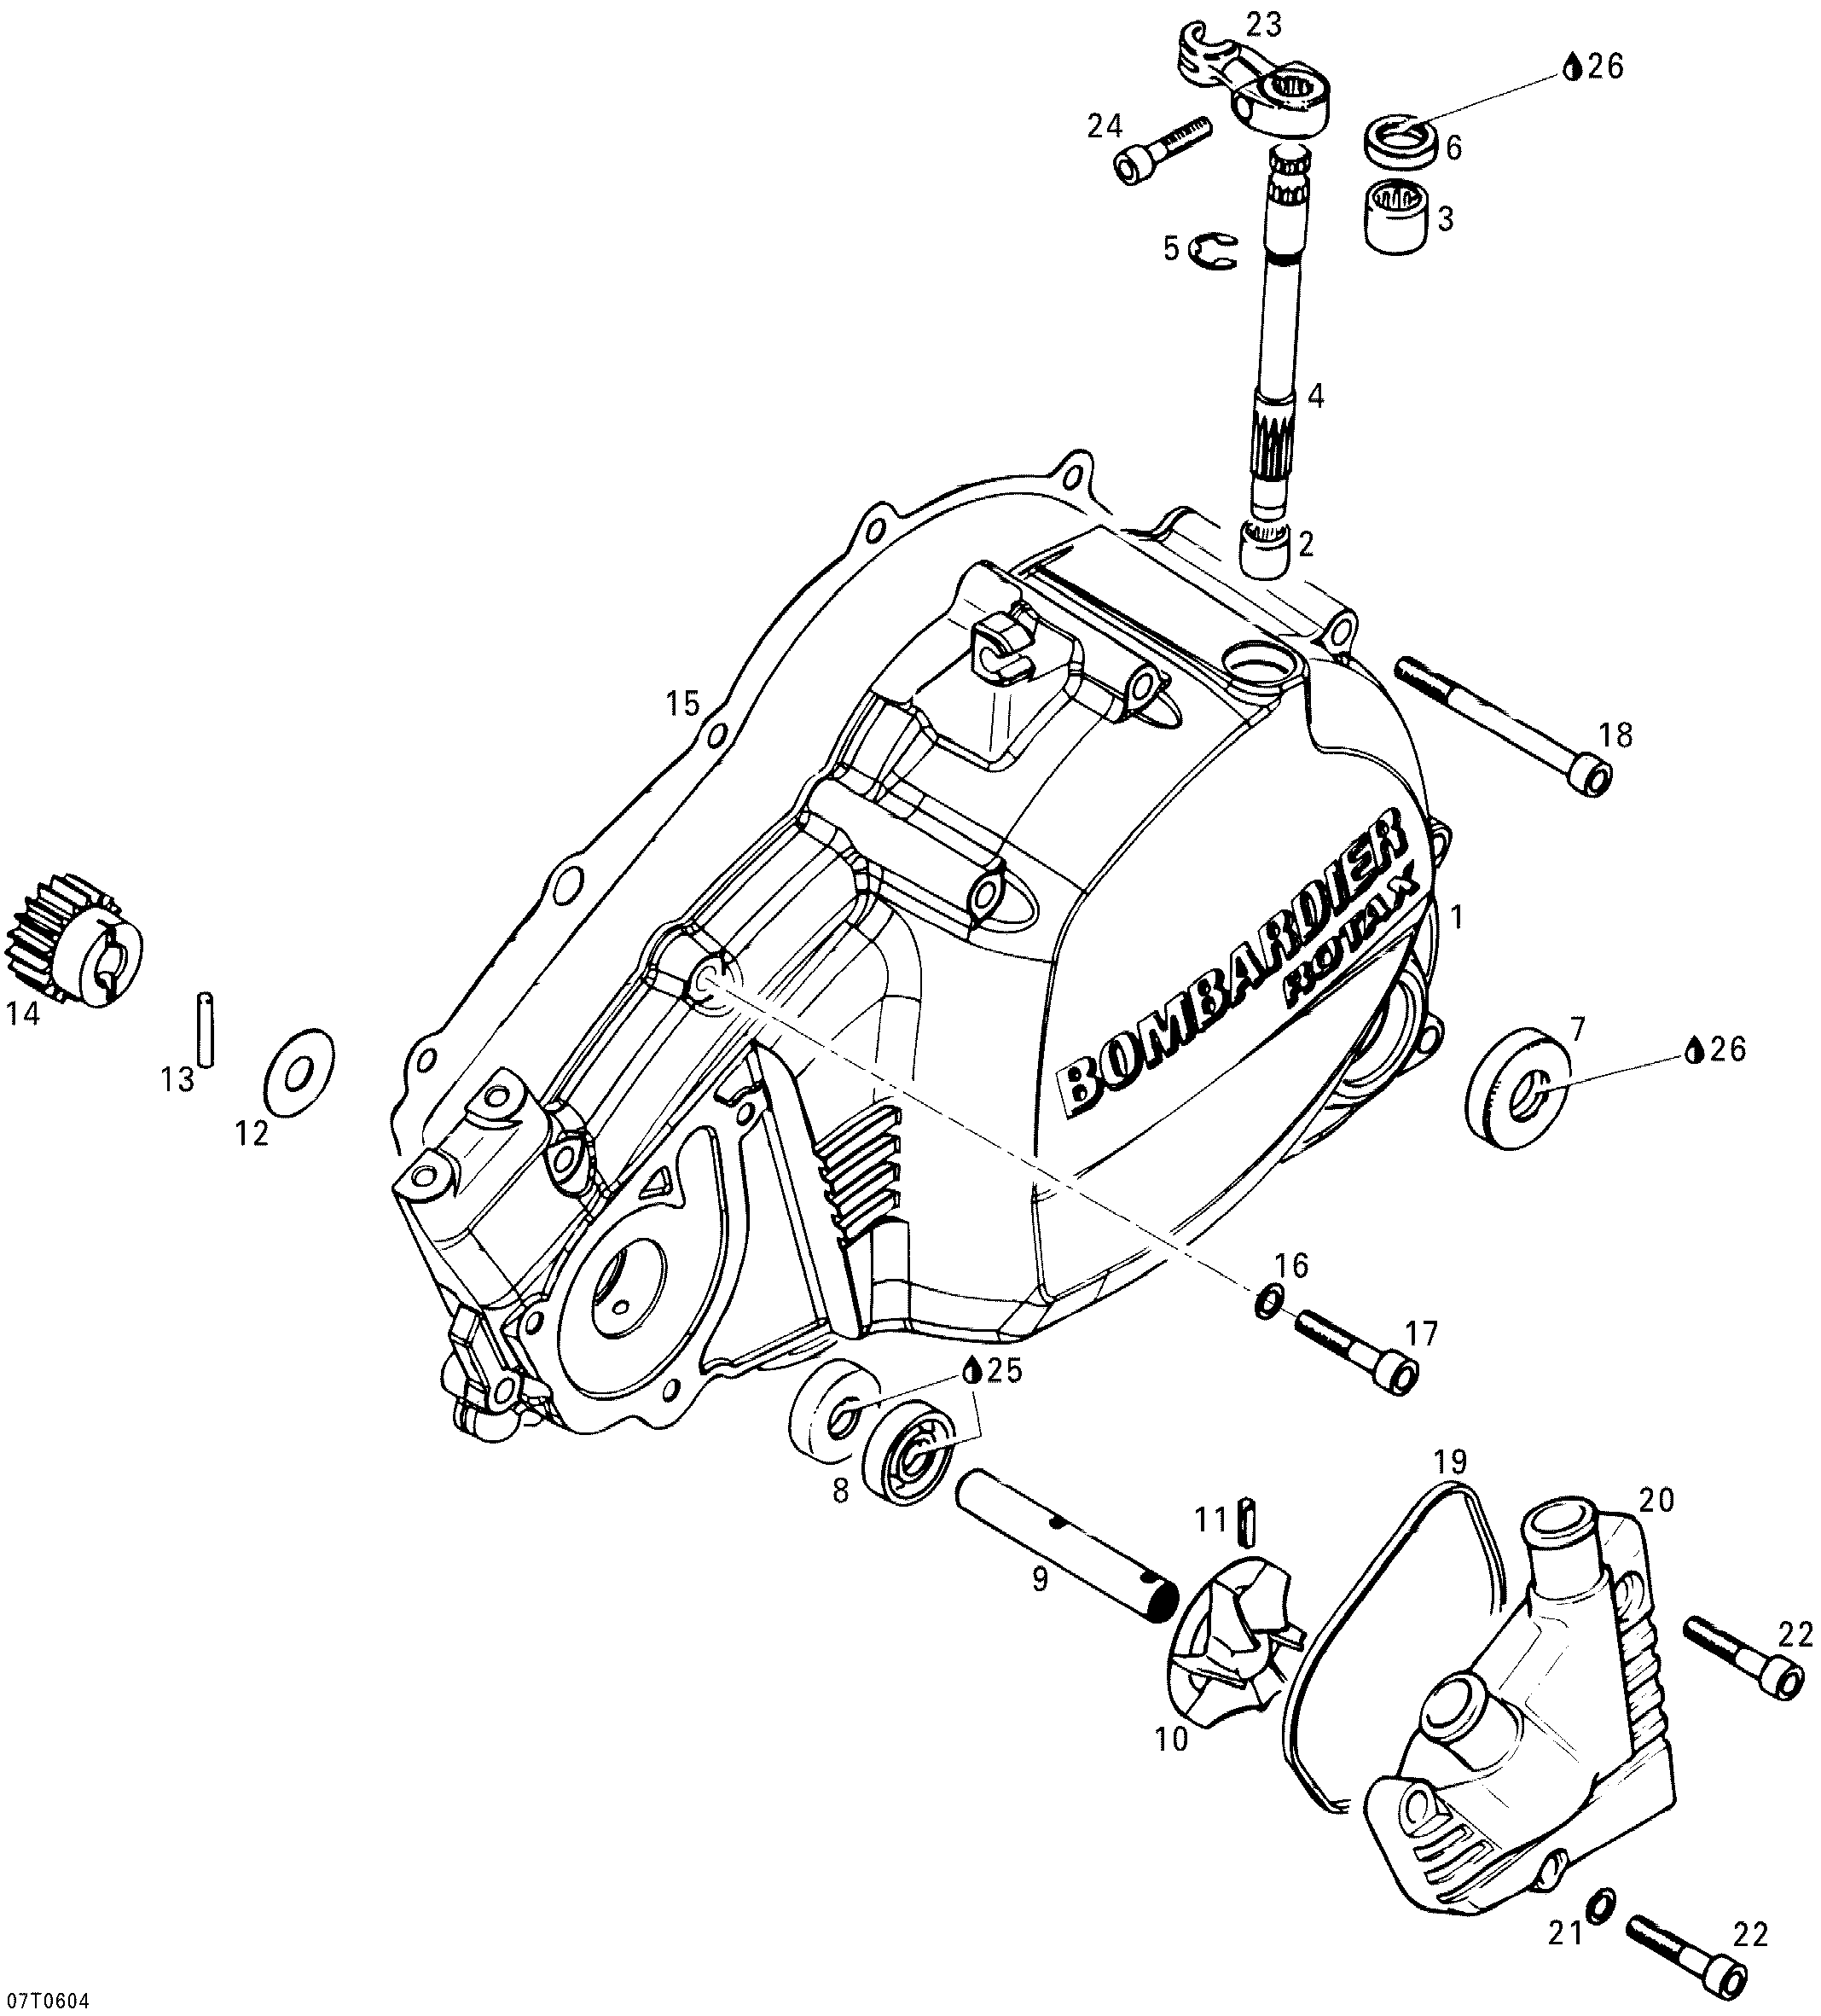 Clutch housing and water pump